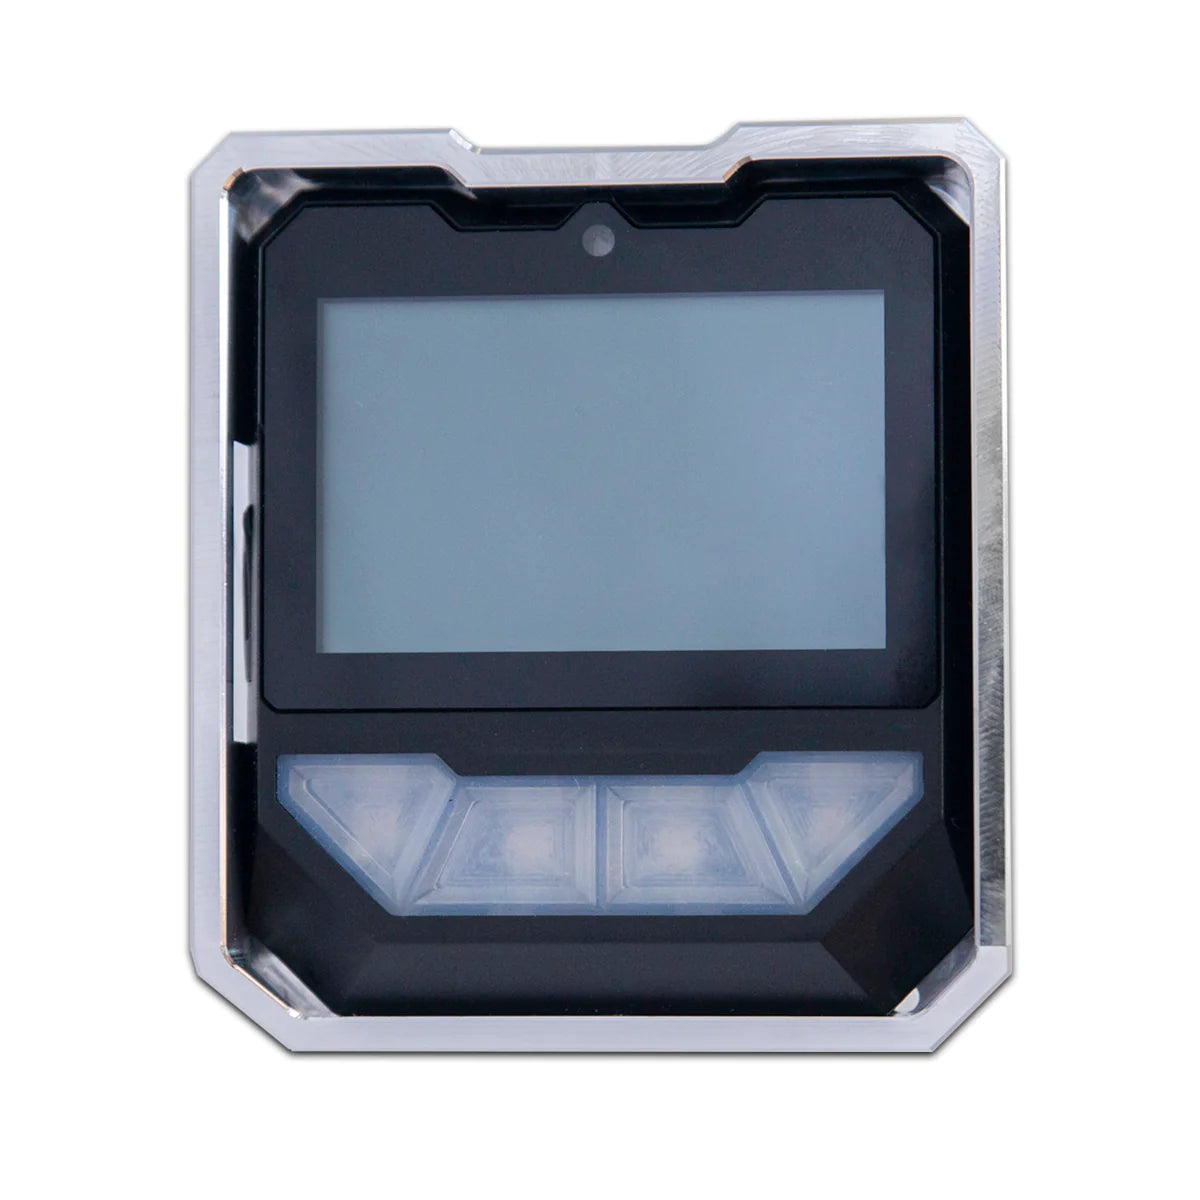 Nucular Display Protective Case with Clamps - Billet Aluminum SurRonshop